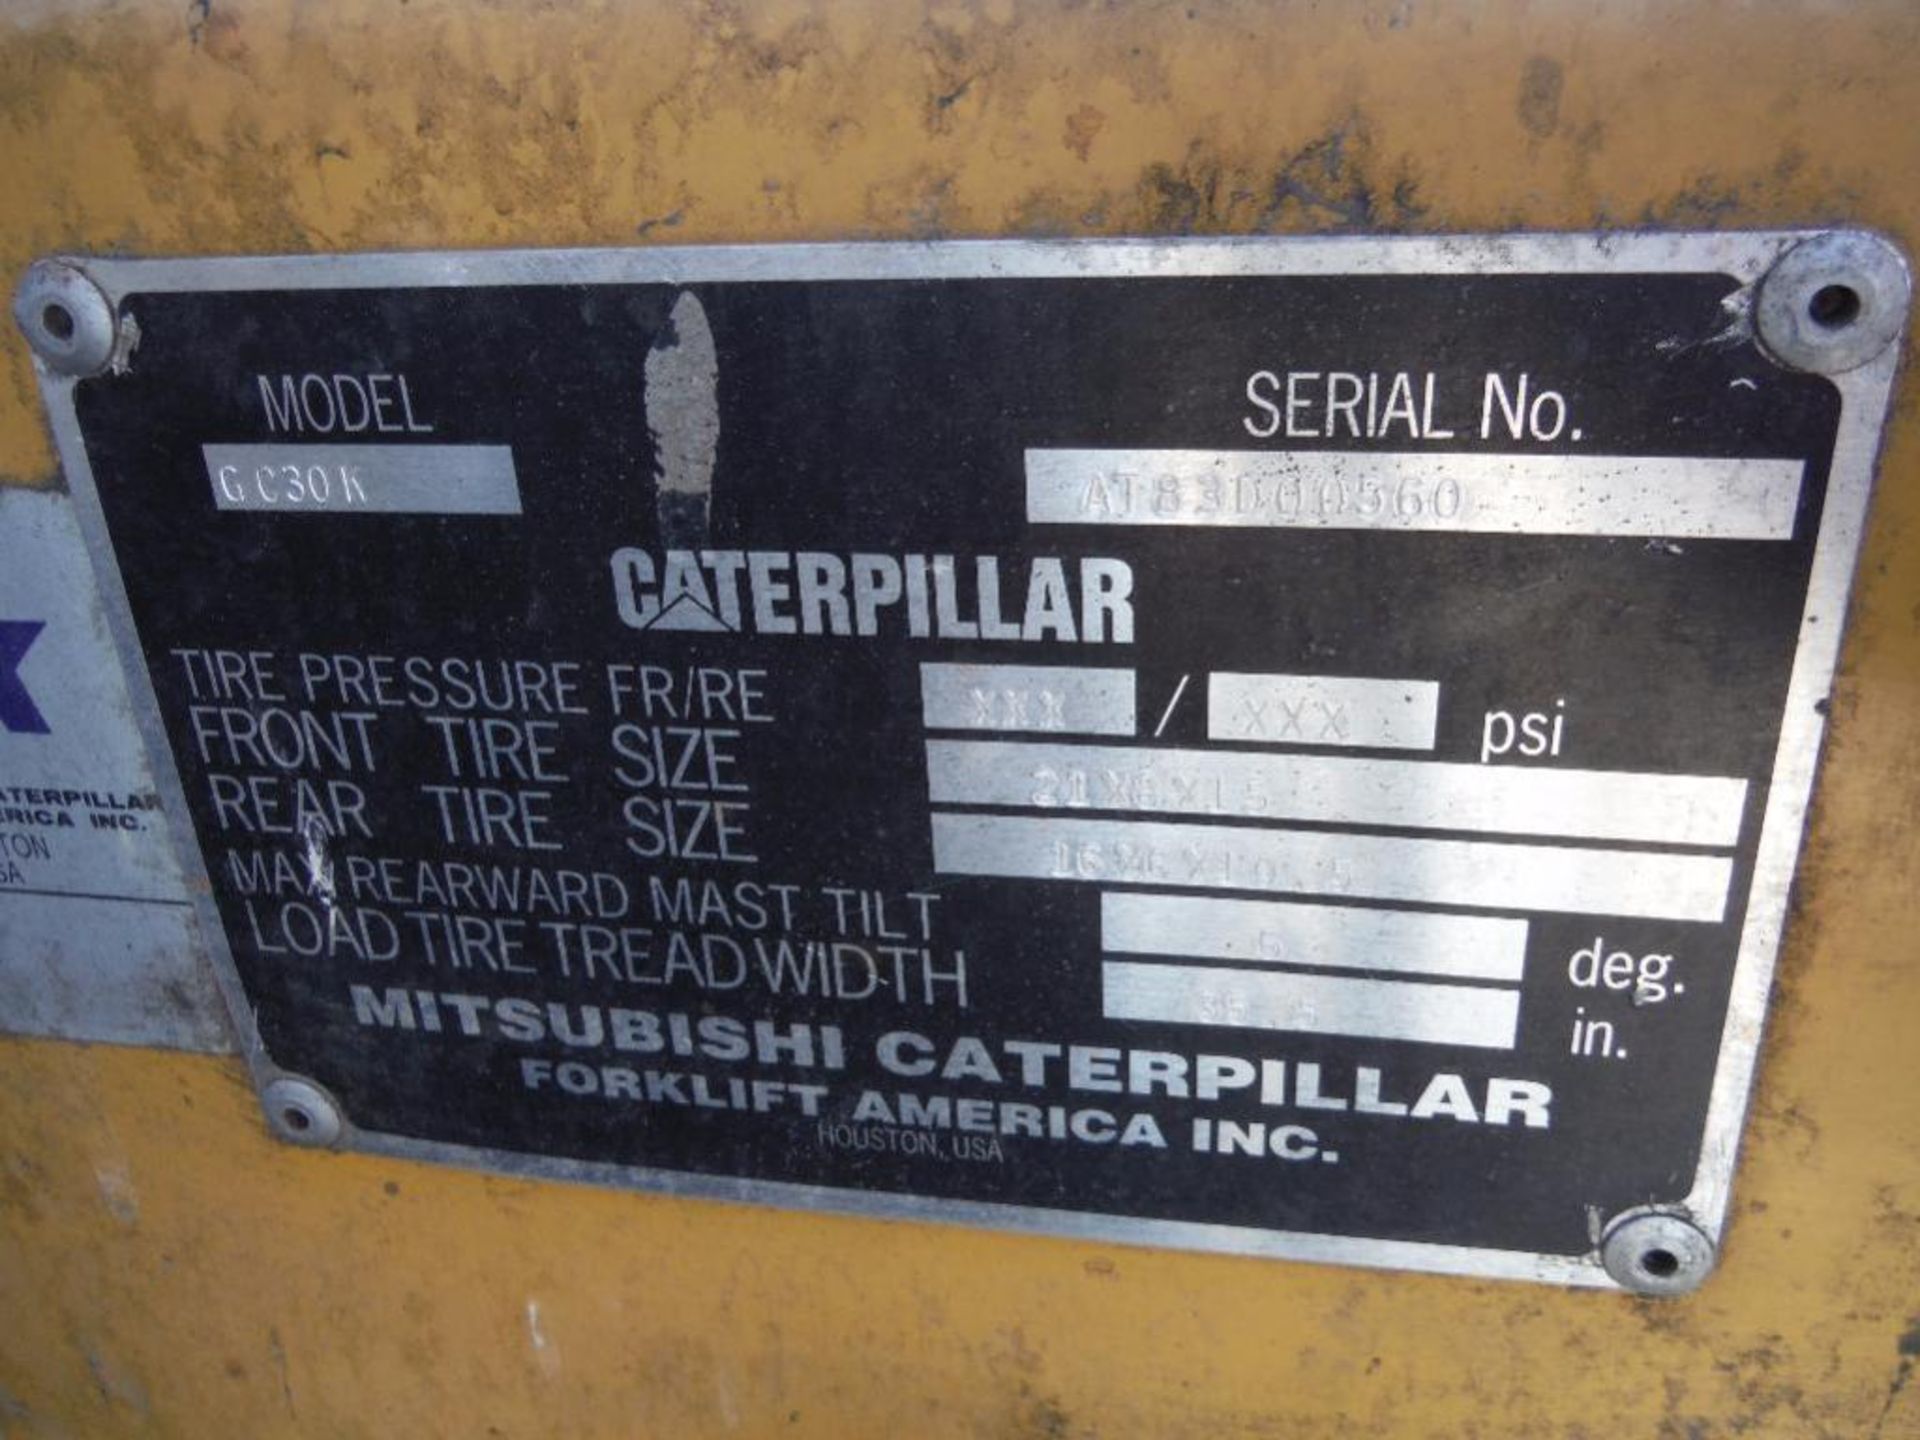 Caterpillar lp gas forklift, Model GC30K, SN AT83D00560, 4360 lb. capacity, 187 in. lift height, 3 - Image 7 of 7